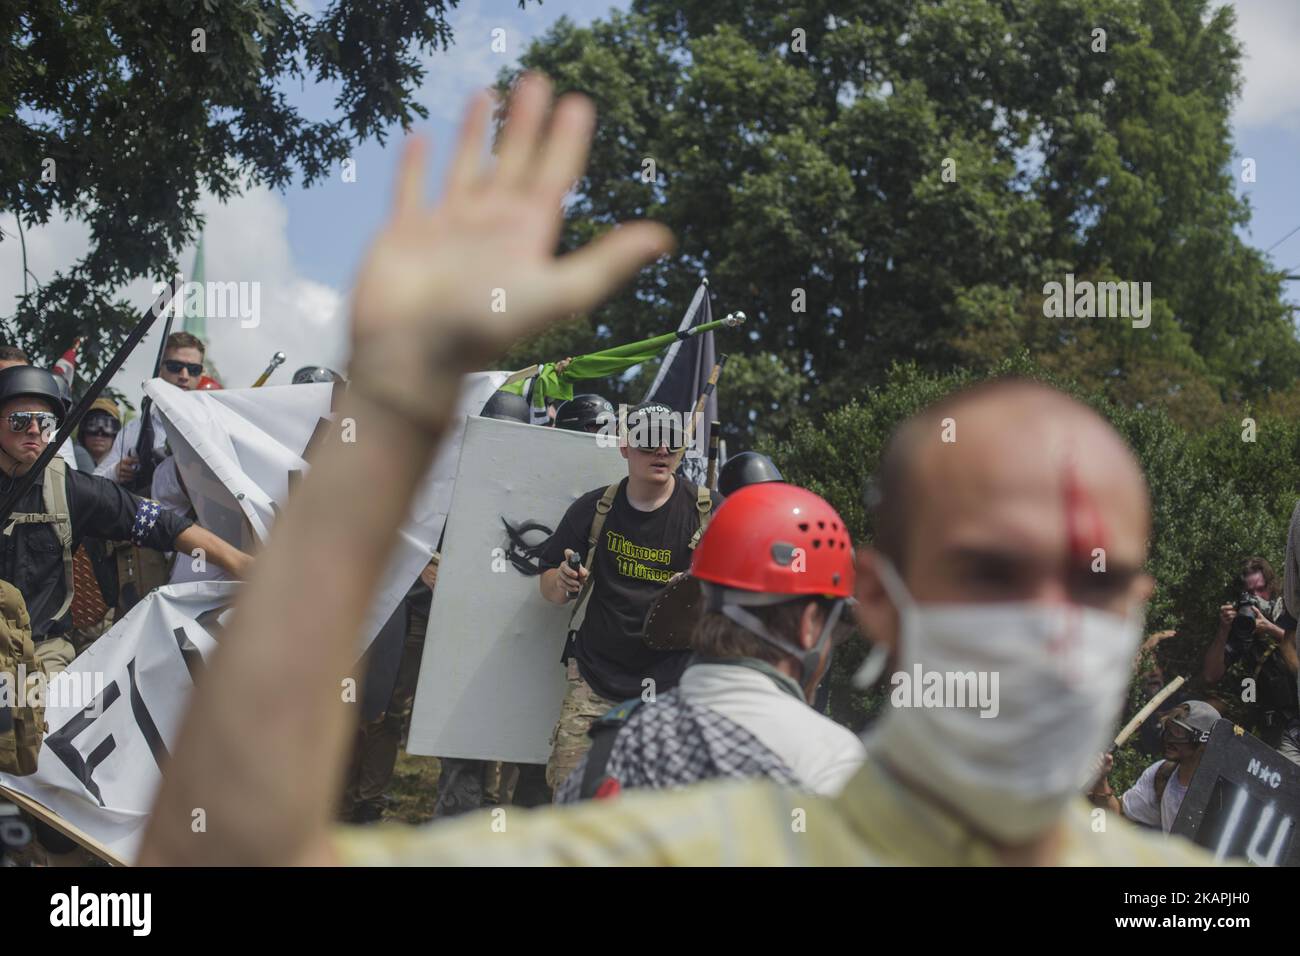 Dozens of protesters on both sides left the scene bloodied by the brawls on August 12, 2017 in Charlottesville, Virginia, USA. The White Supremacists/Alt Right supporters were forcibly removed by police. (Photo by Shay Horse/NurPhoto) *** Please Use Credit from Credit Field *** Stock Photo